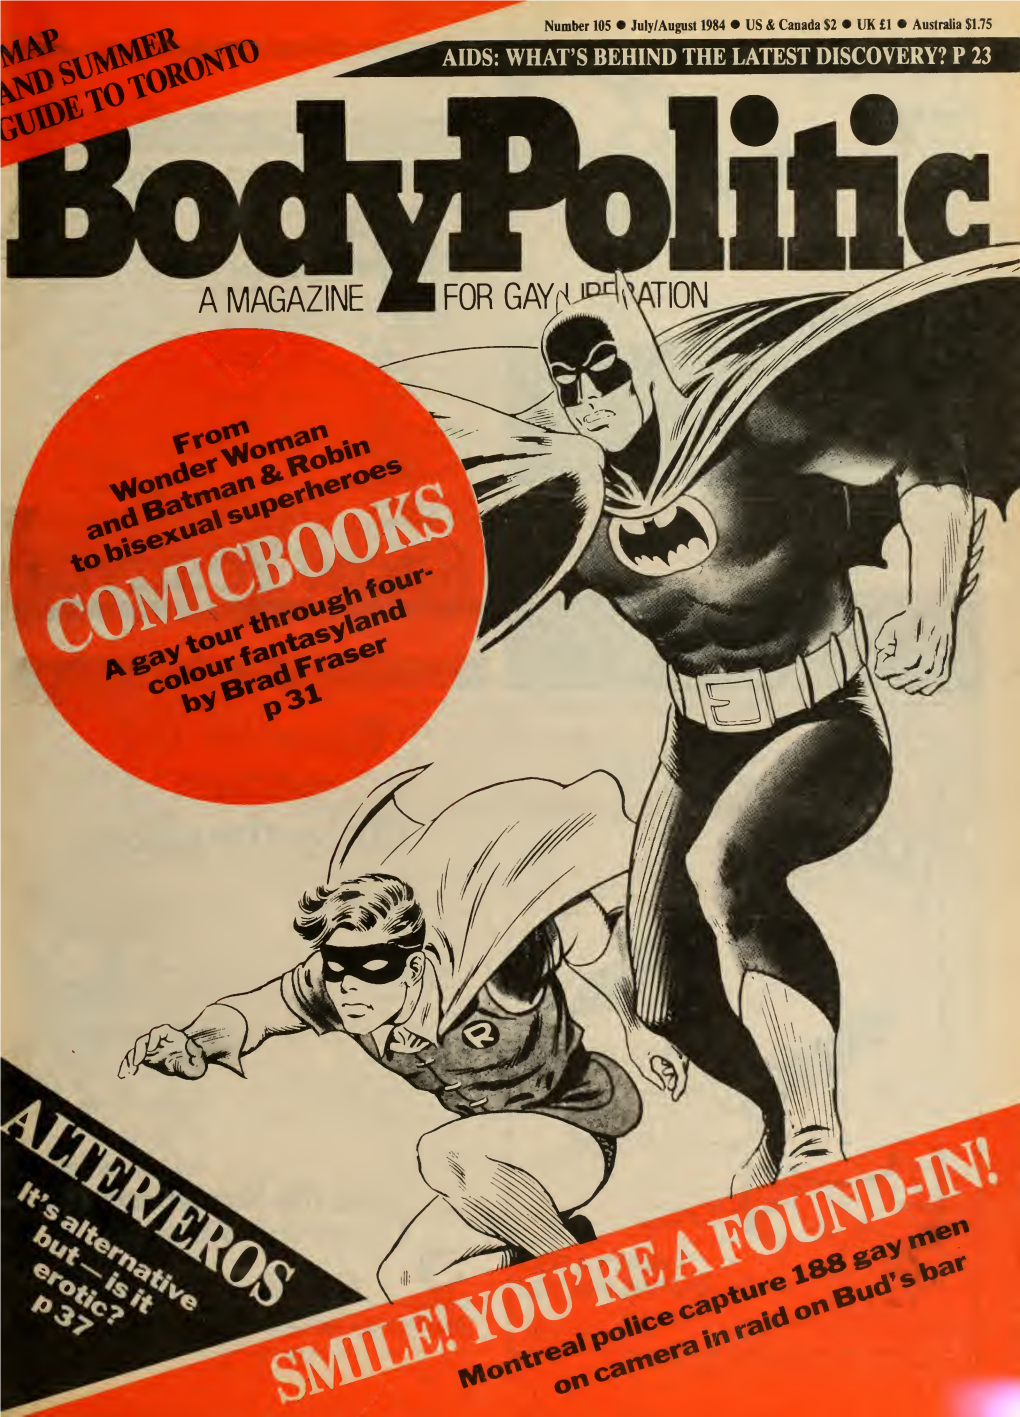 The Body Politic, July/August 1984